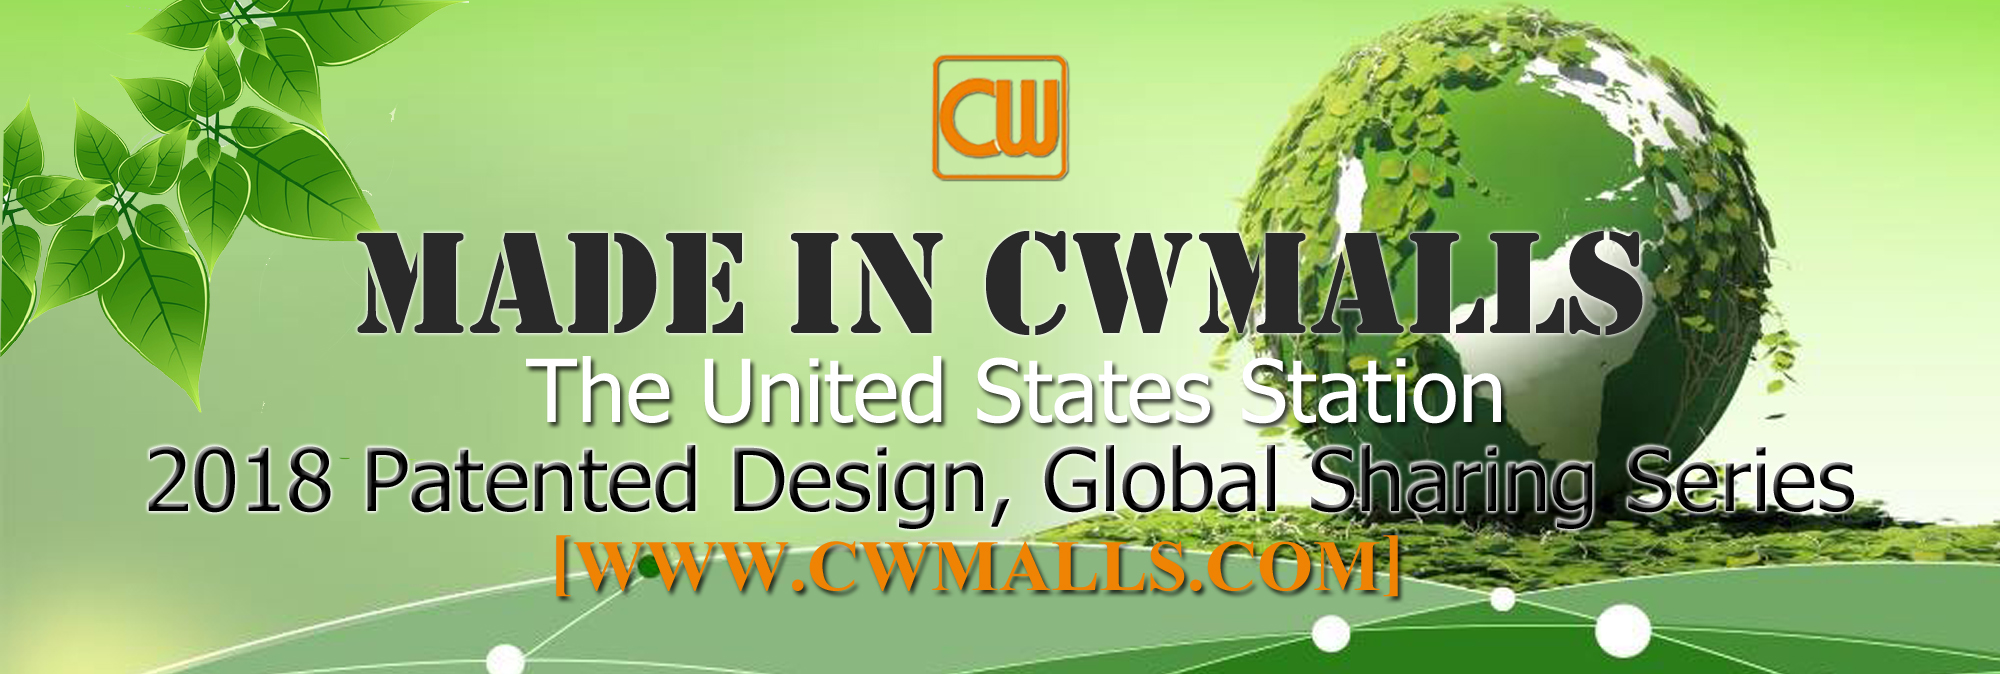 MADE IN CWMALLS—The United States Station